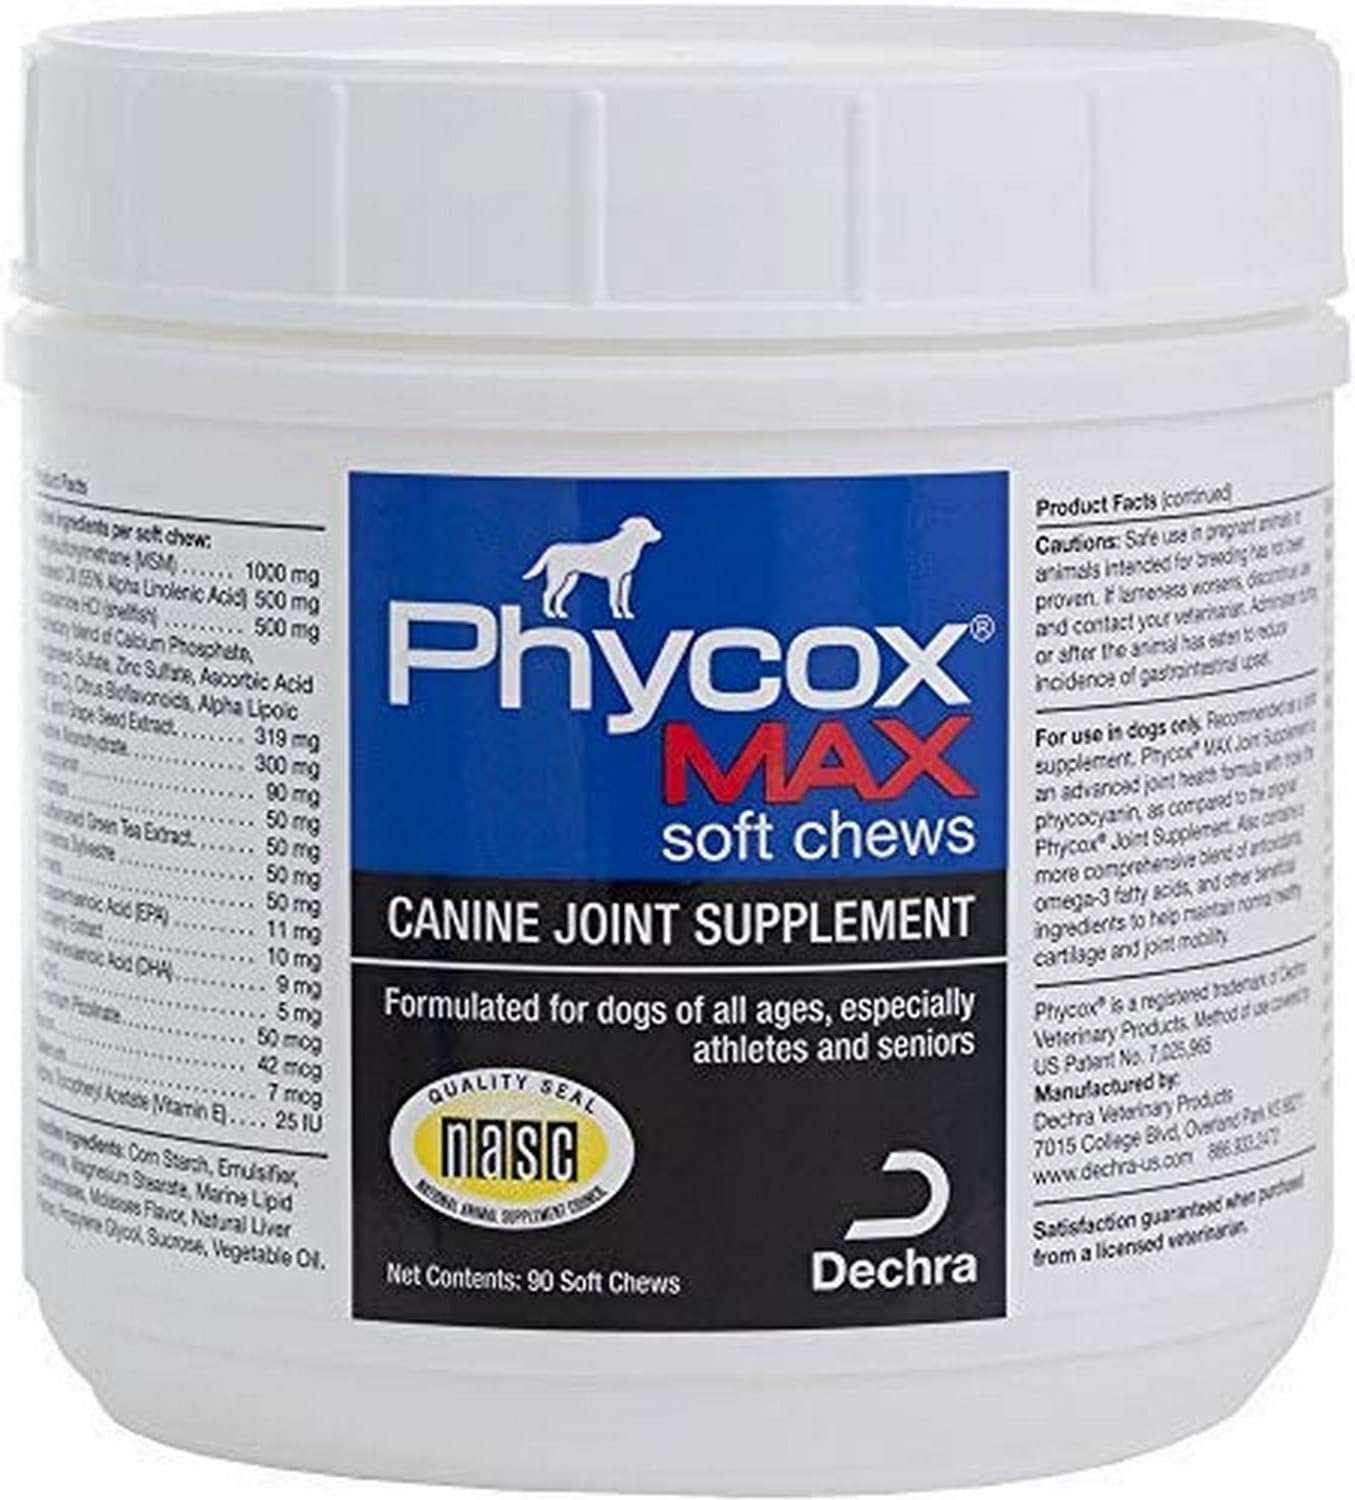 PSCH Phycox Max 90 Count Canine Soft Chews : Pet Bone And Joint Supplements : Pet Supplies